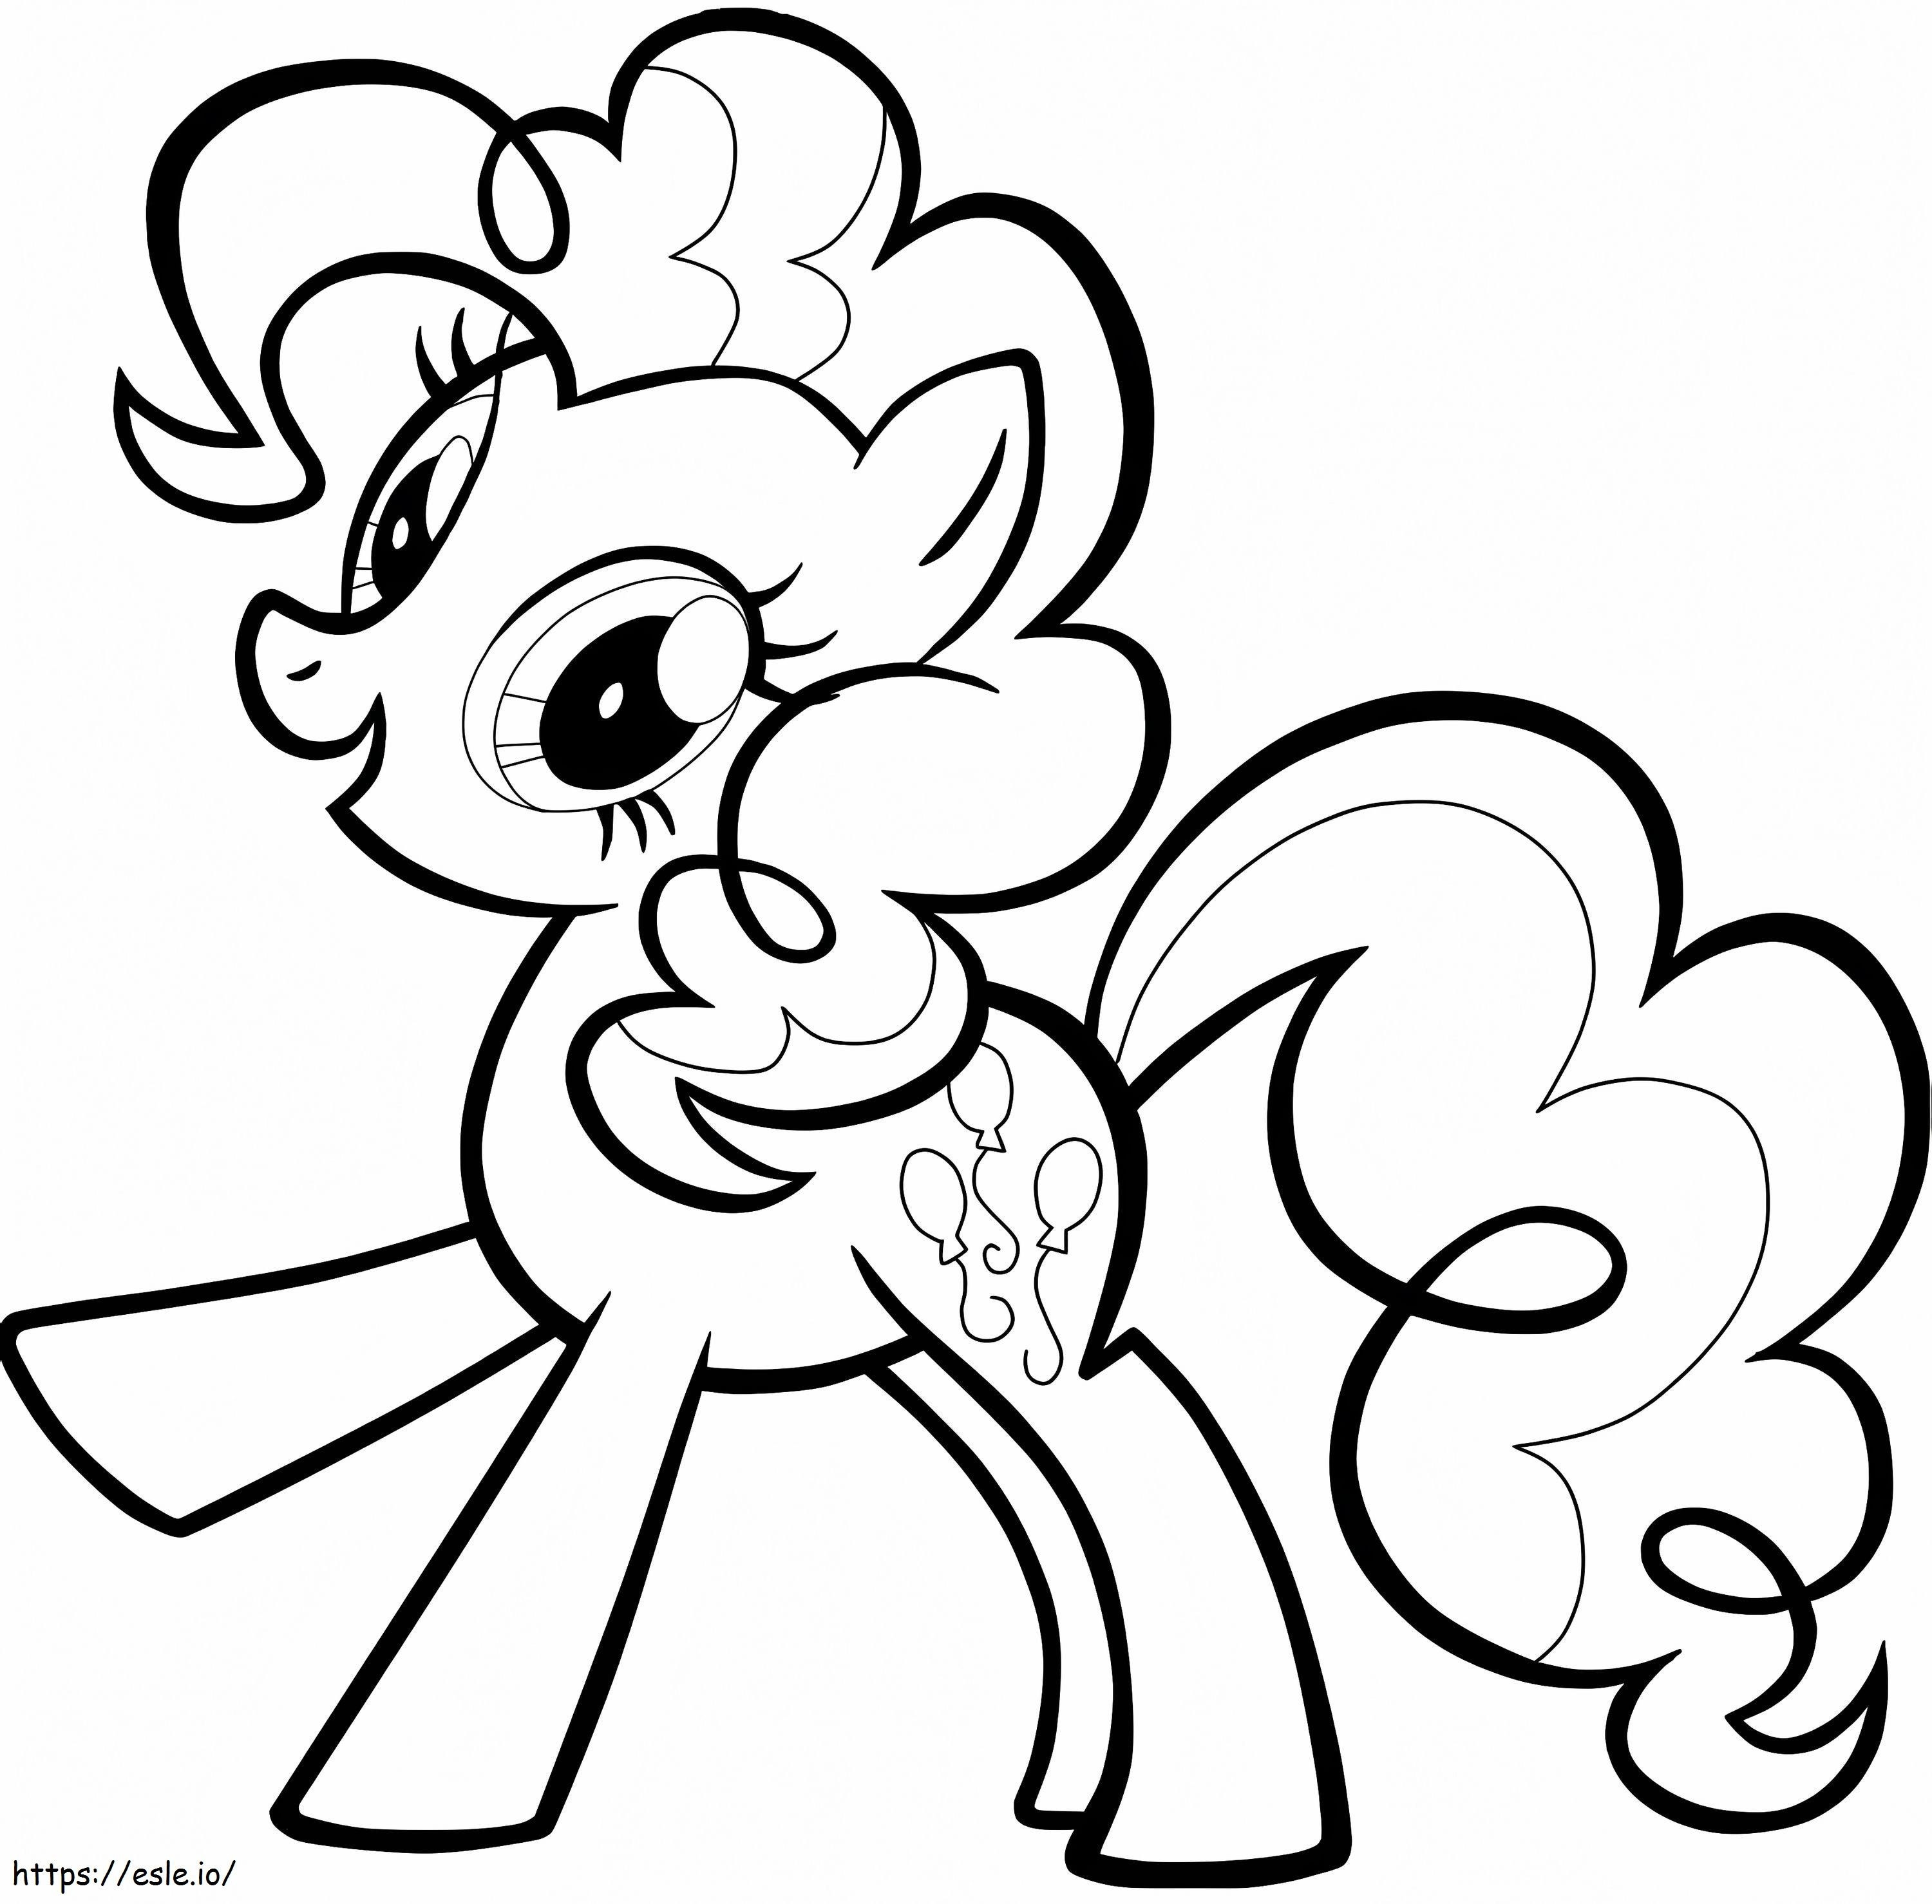 Pinkie Pie From My Little Pony coloring page